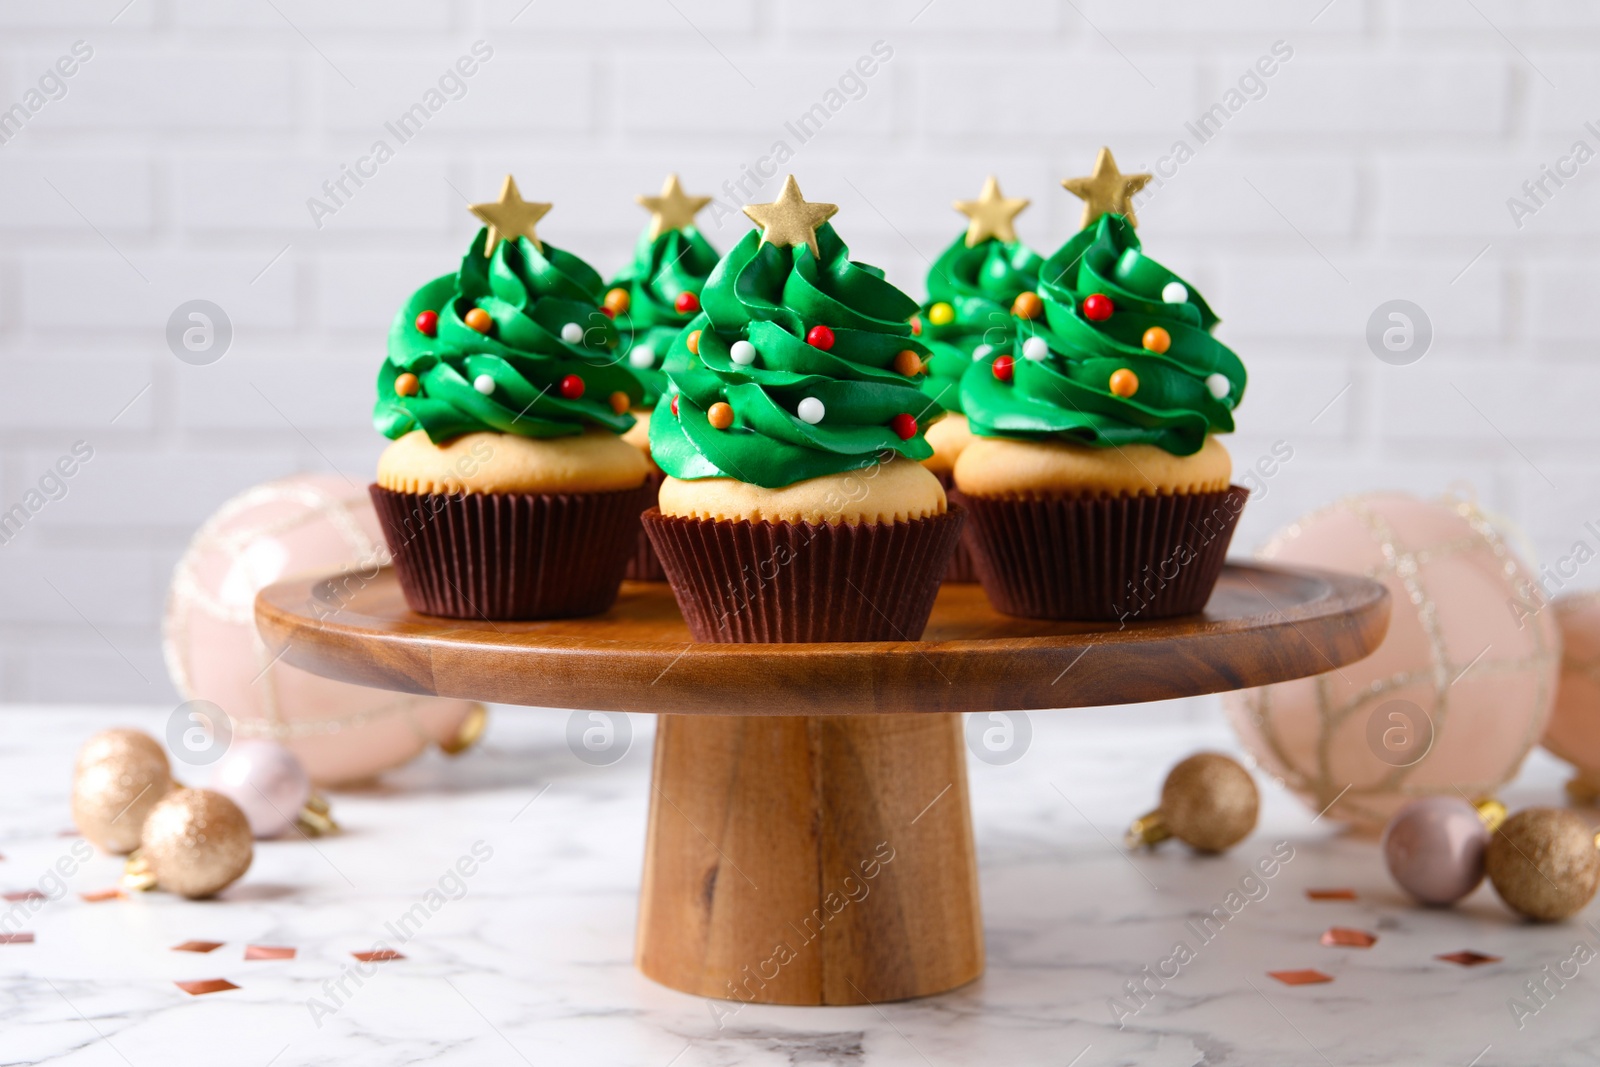 Photo of Christmas tree shaped cupcakes on white marble table